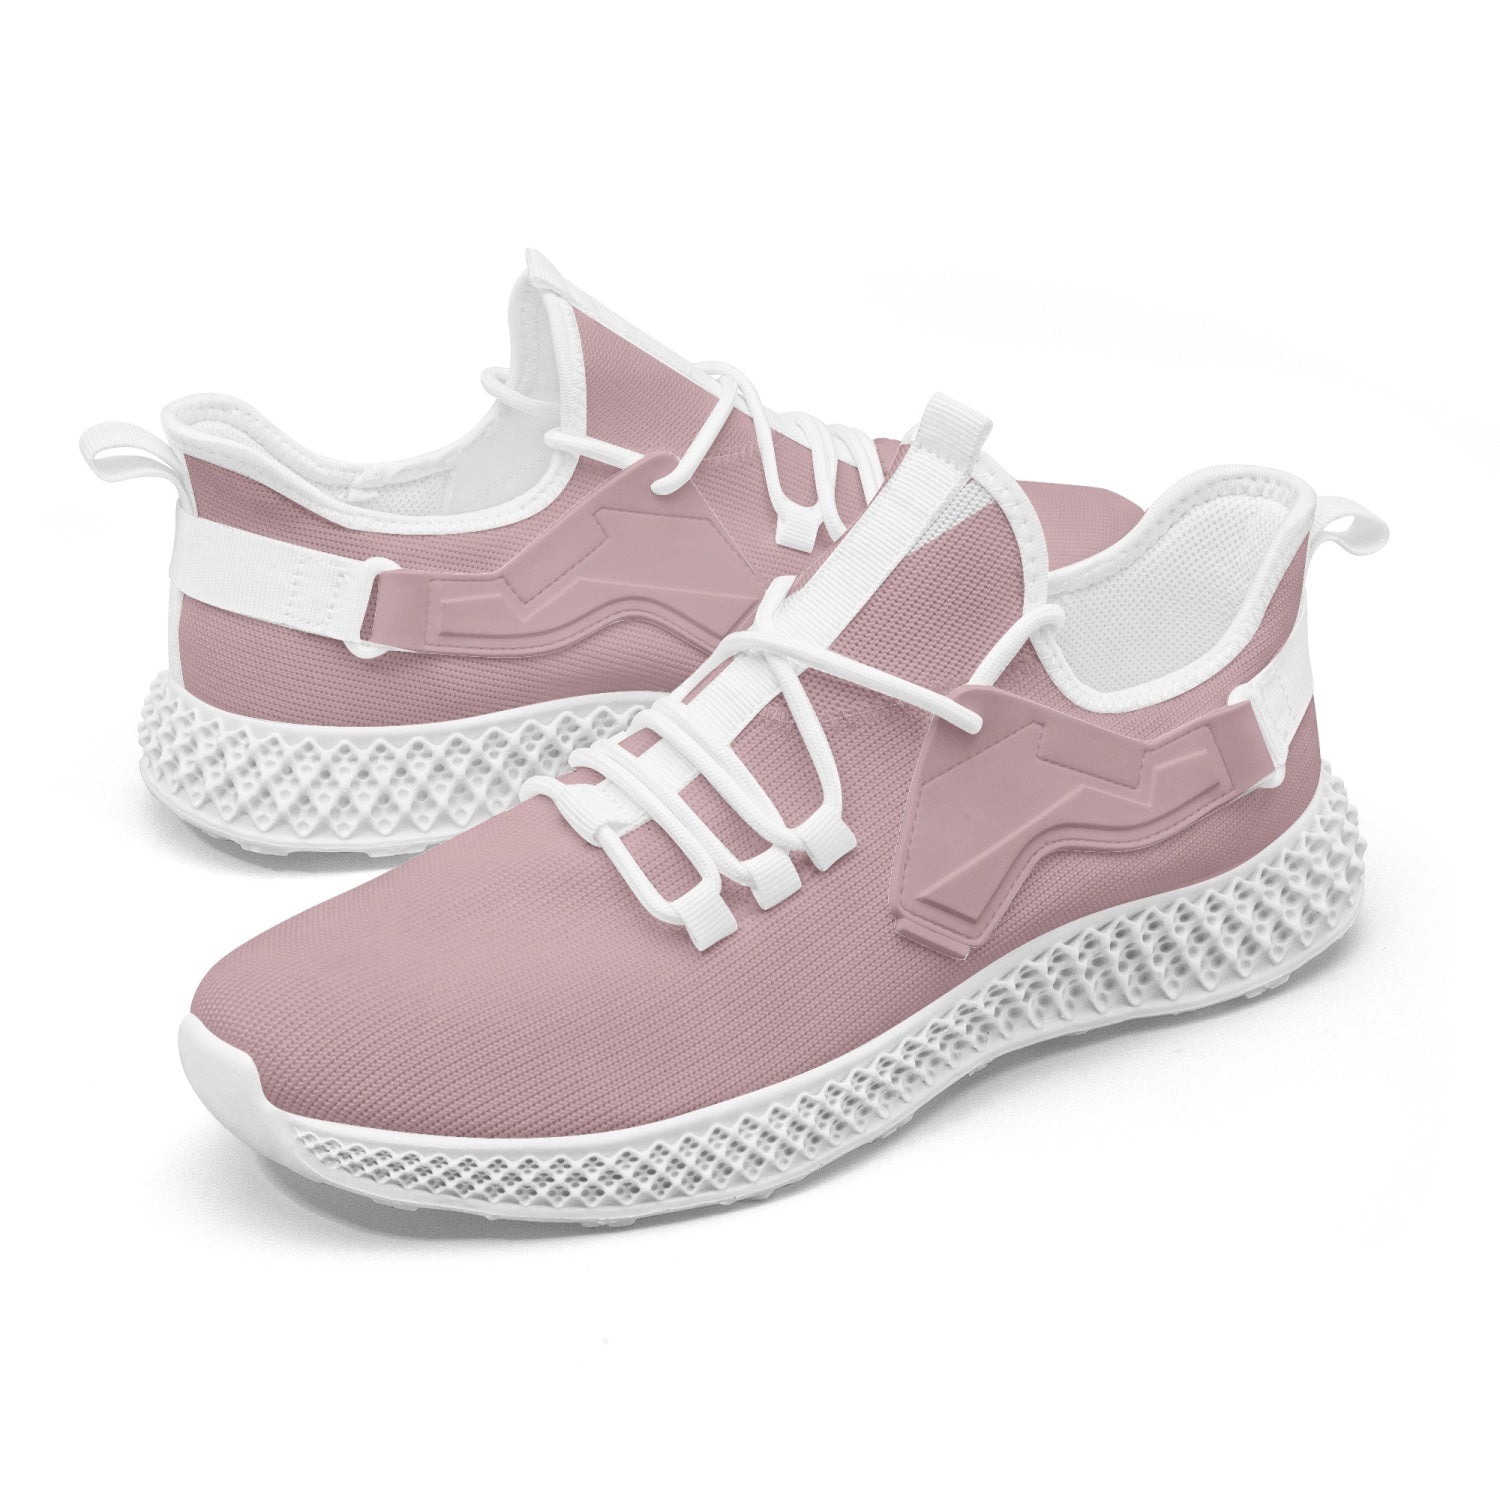 Cameo Pink Net Style Mesh Knit Sneakers